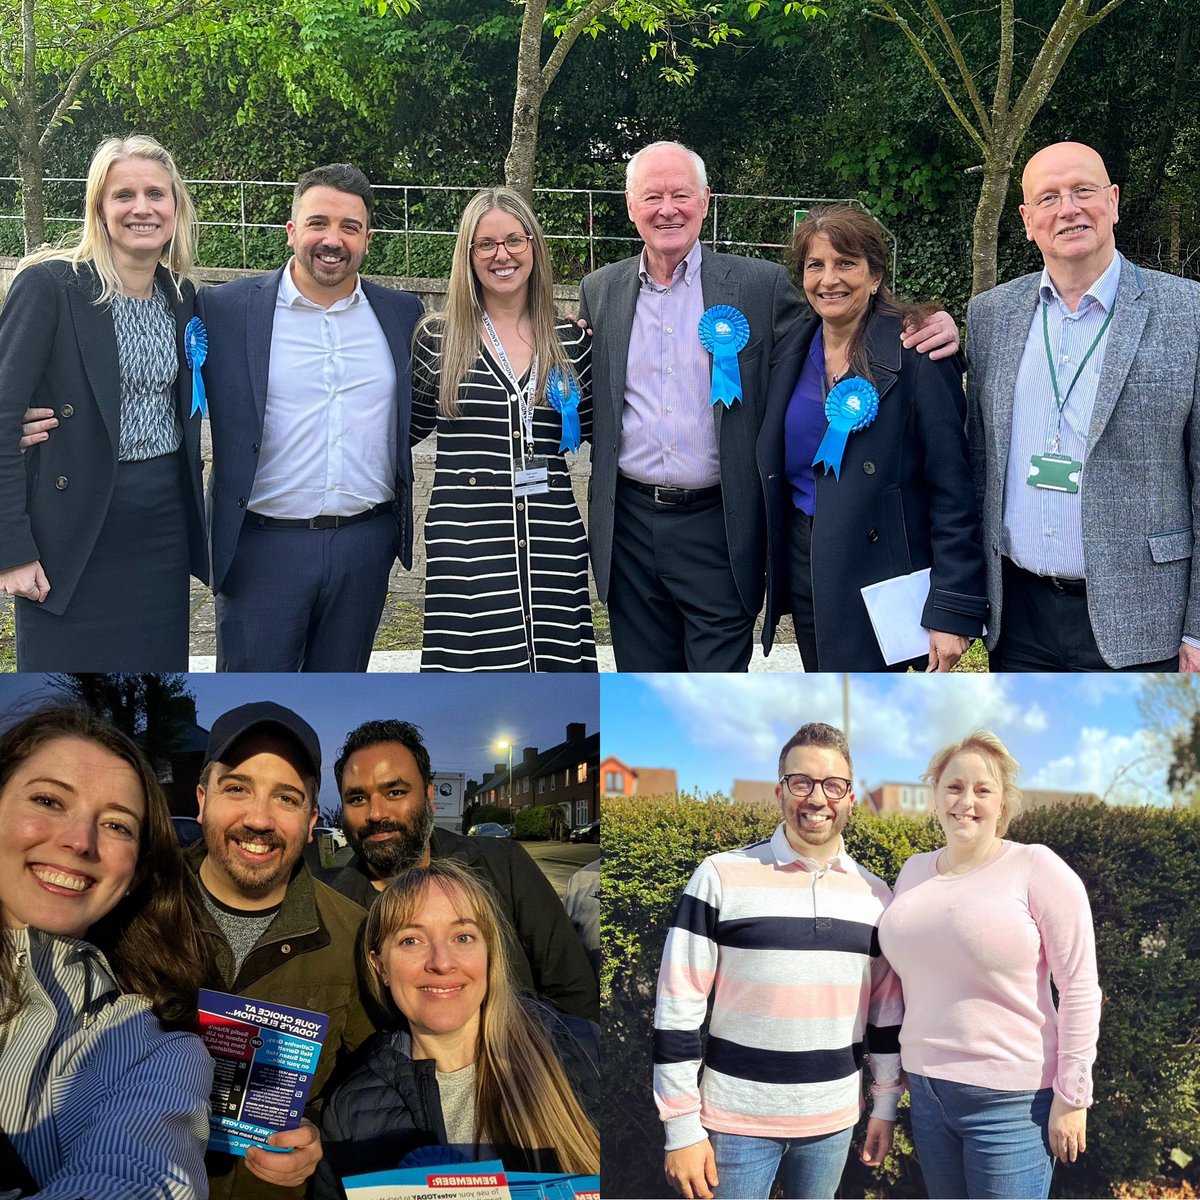 Three incredible results for three incredible ladies today! 🗳️ 💙 Shelly winning CKW with a majority of over 1300! 💙 @_Lisa_Townsend smashing the PCC election in #Surrey! 💙 & despite the Lib Dem’s chucking the kitchen sink at St Helier, @CGray8567 walking away with the win!